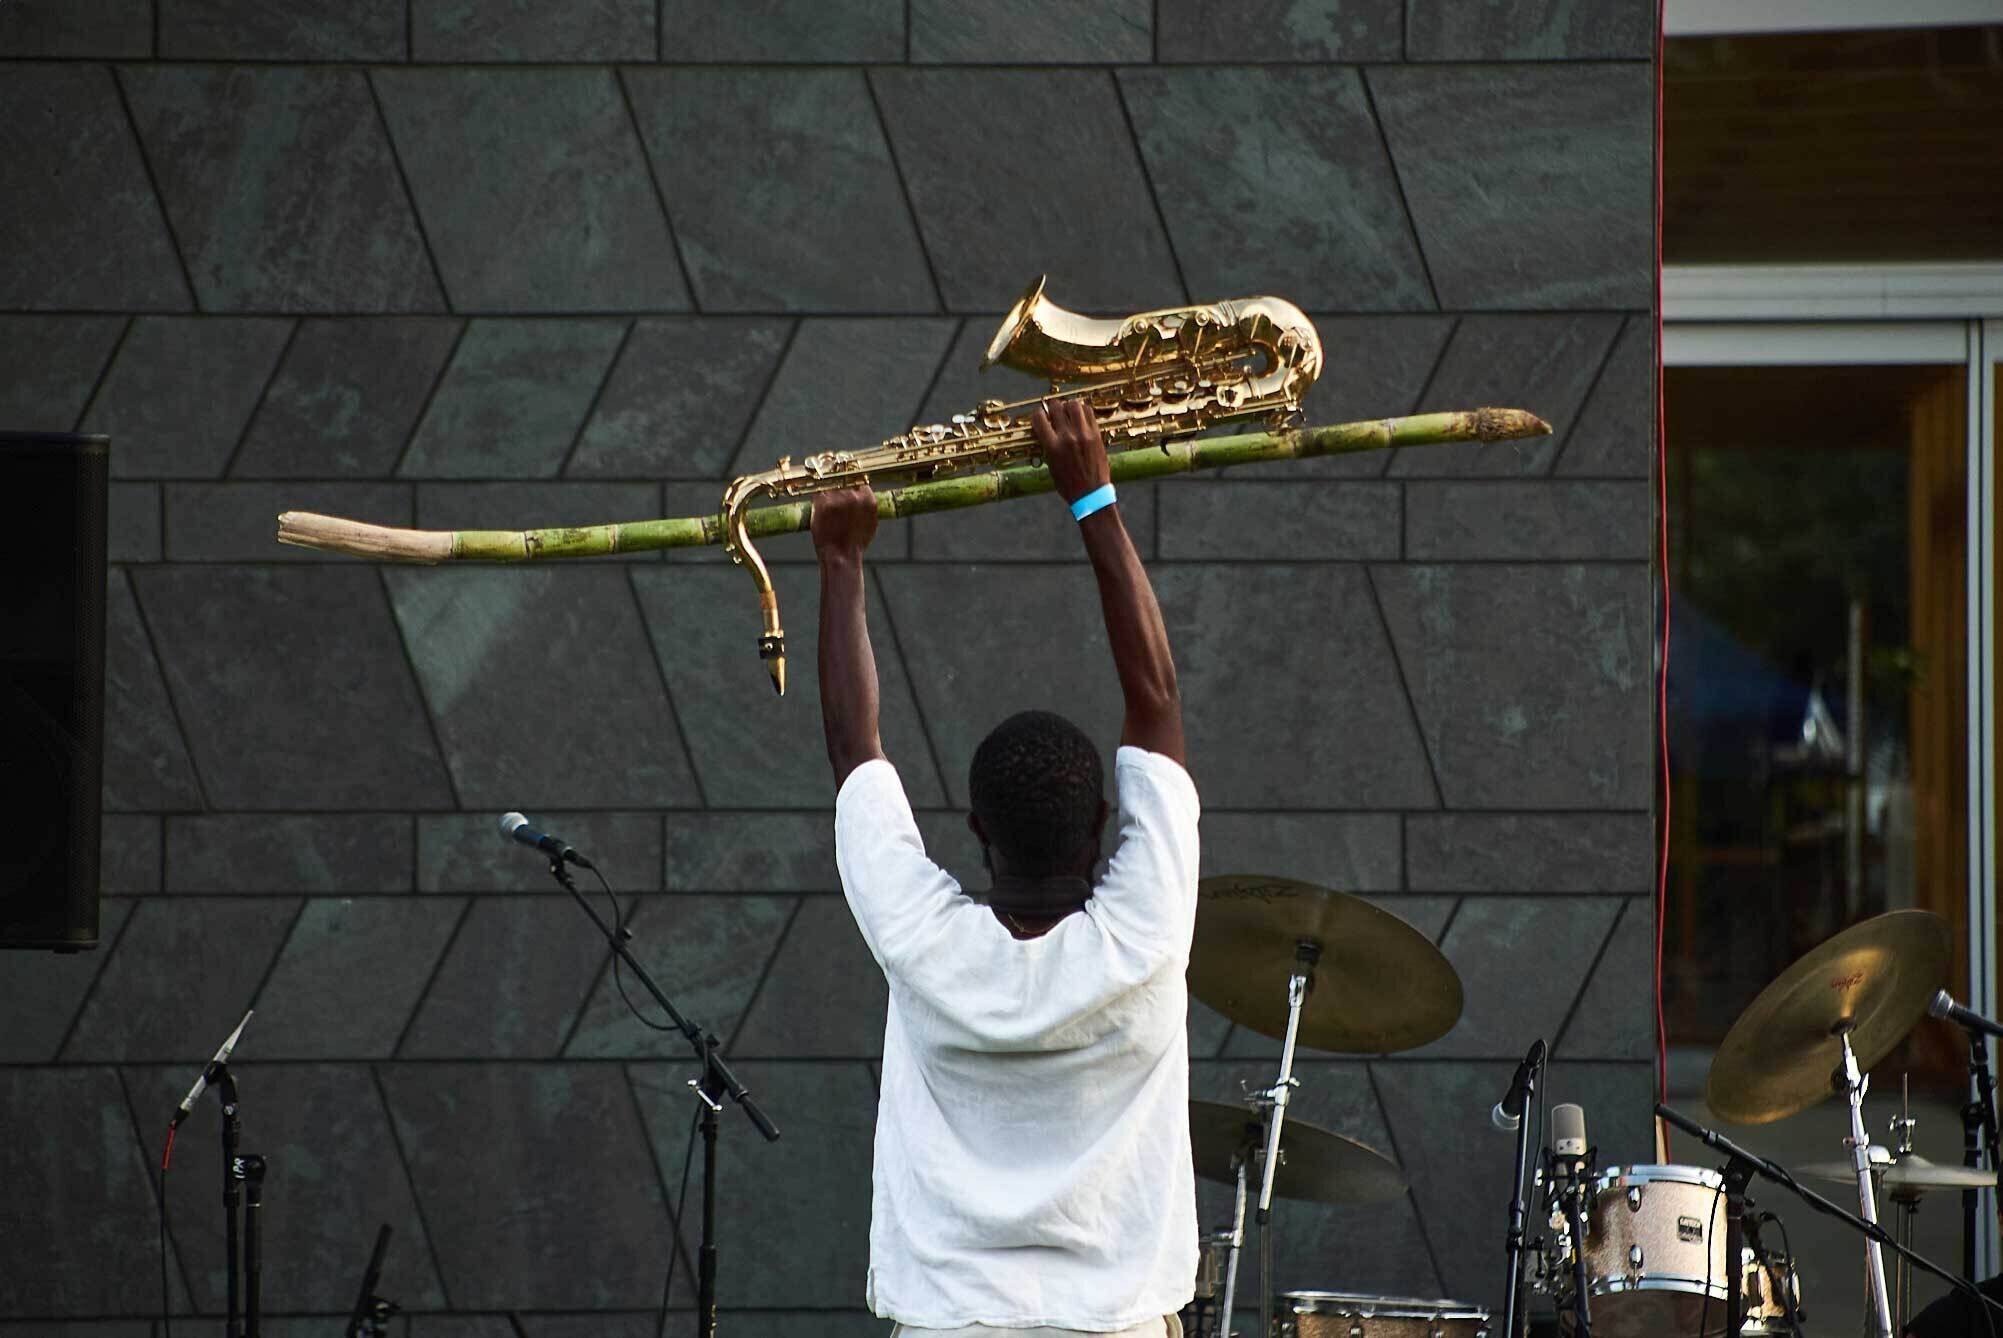 Person in a white shirt holds a saxophone and a long bamboo stick above their head on an outdoor stage with drums and microphones.